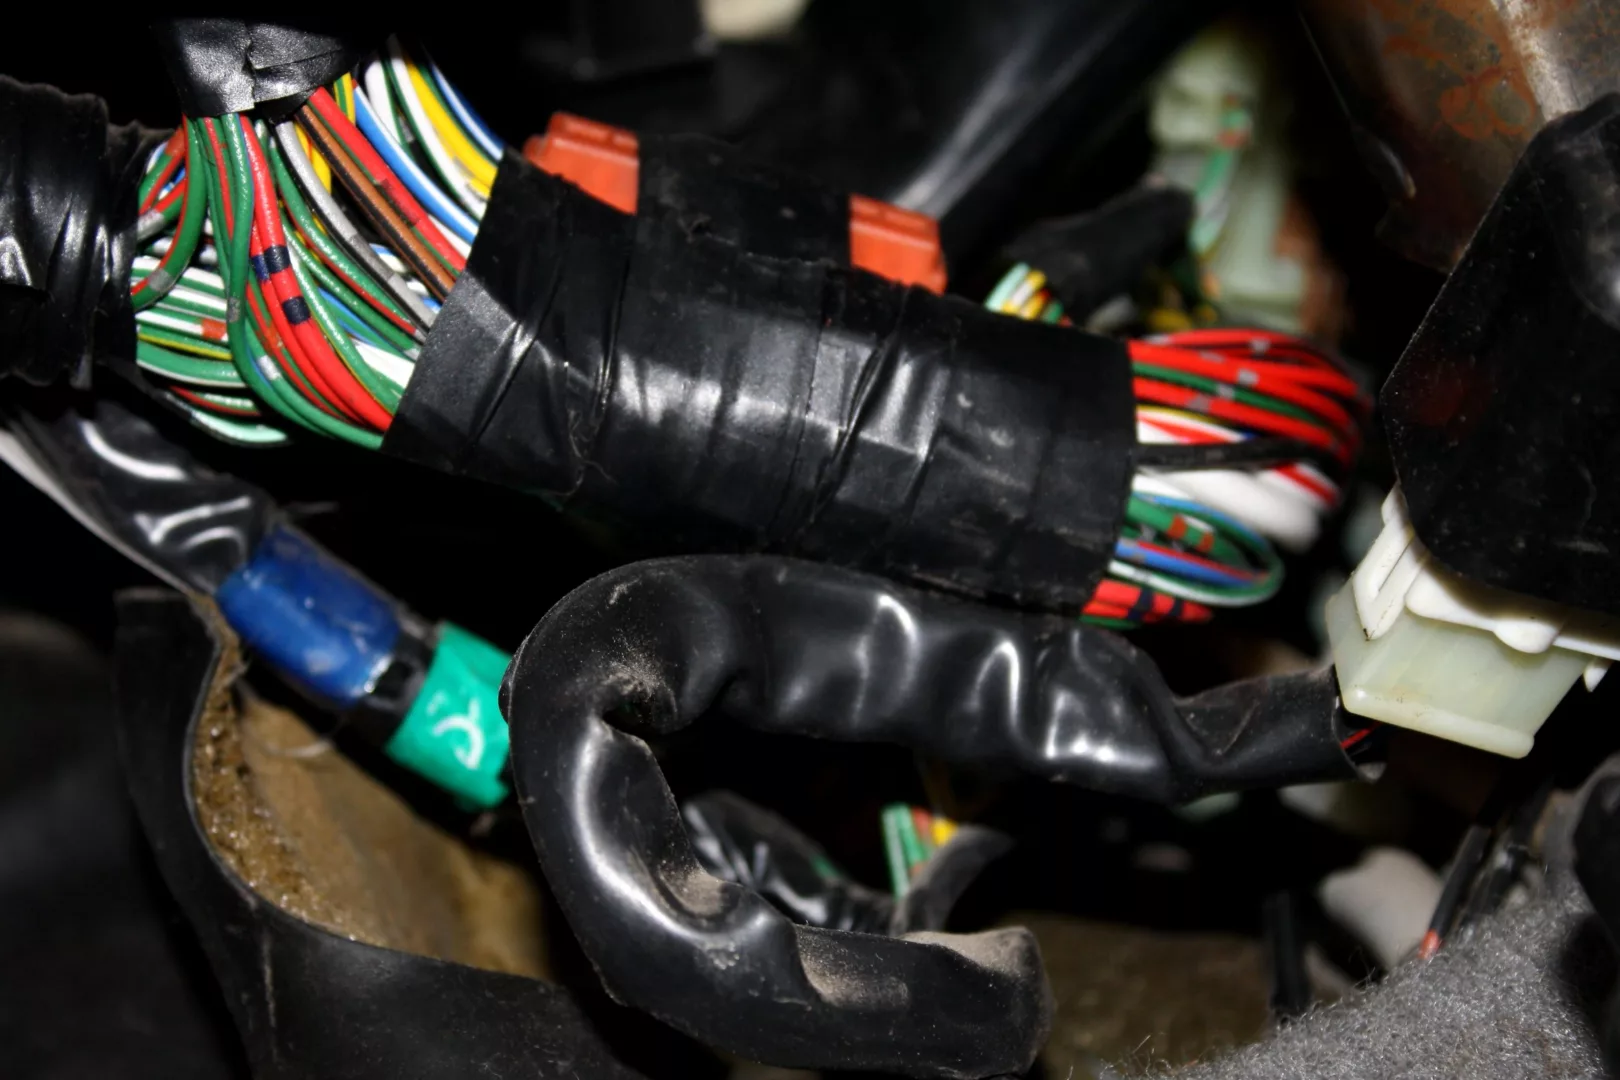 image shows electrical tape wrapping wiring looms